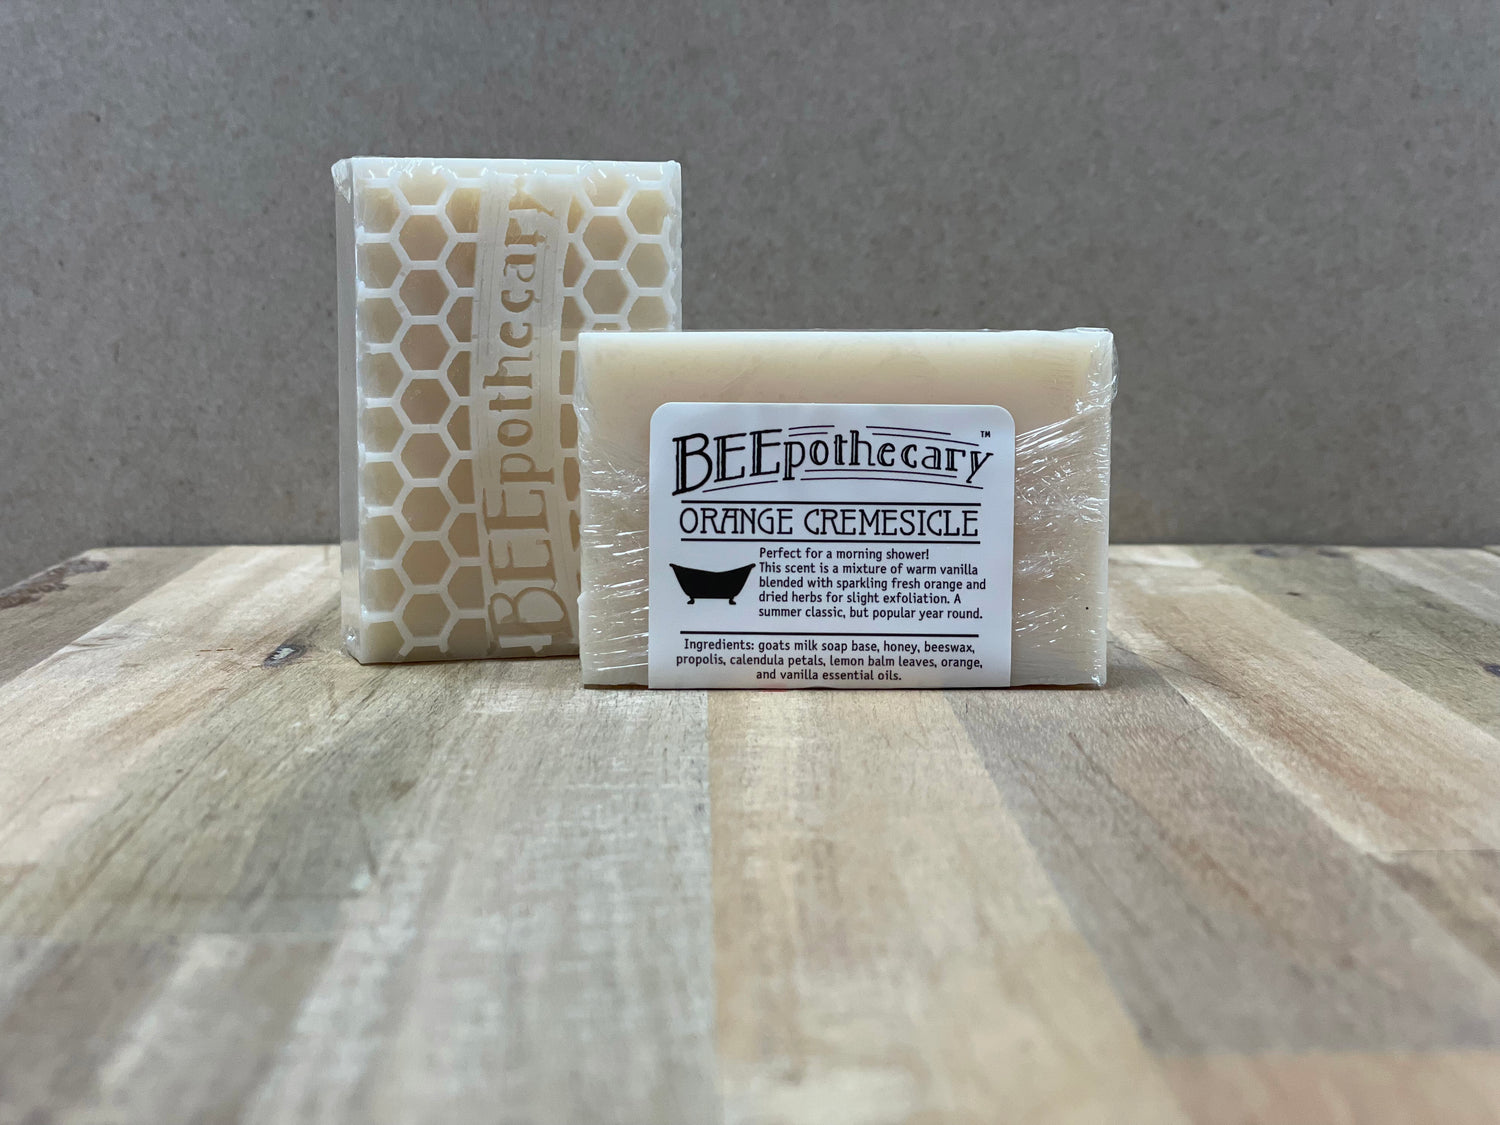 BEEpothecary Goat Milk Soap Orange Cremesicle fragrance in packaging with white label